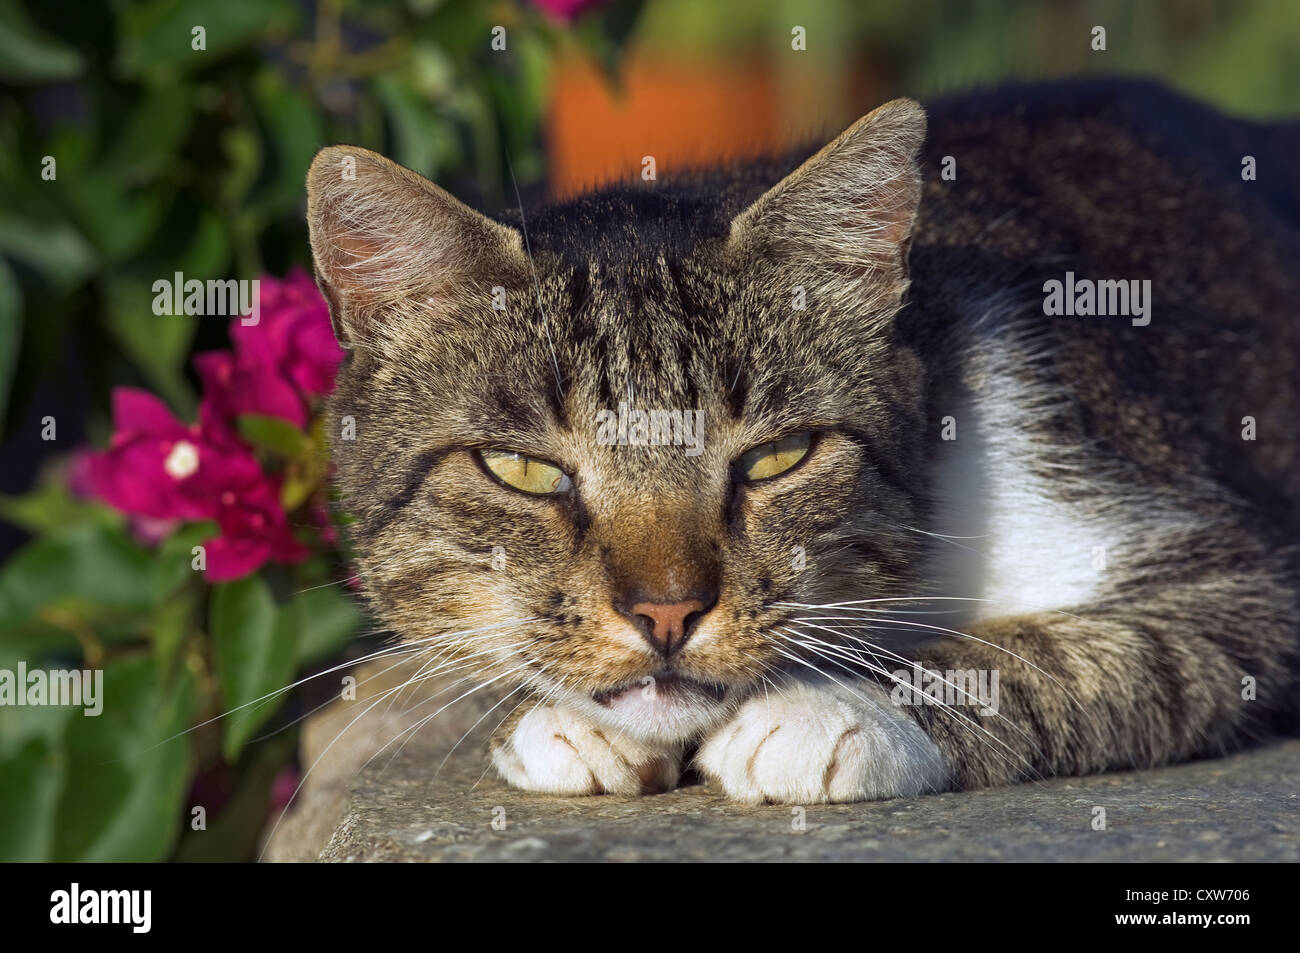 Portrait of a dozing cat looking at camera Stock Photo